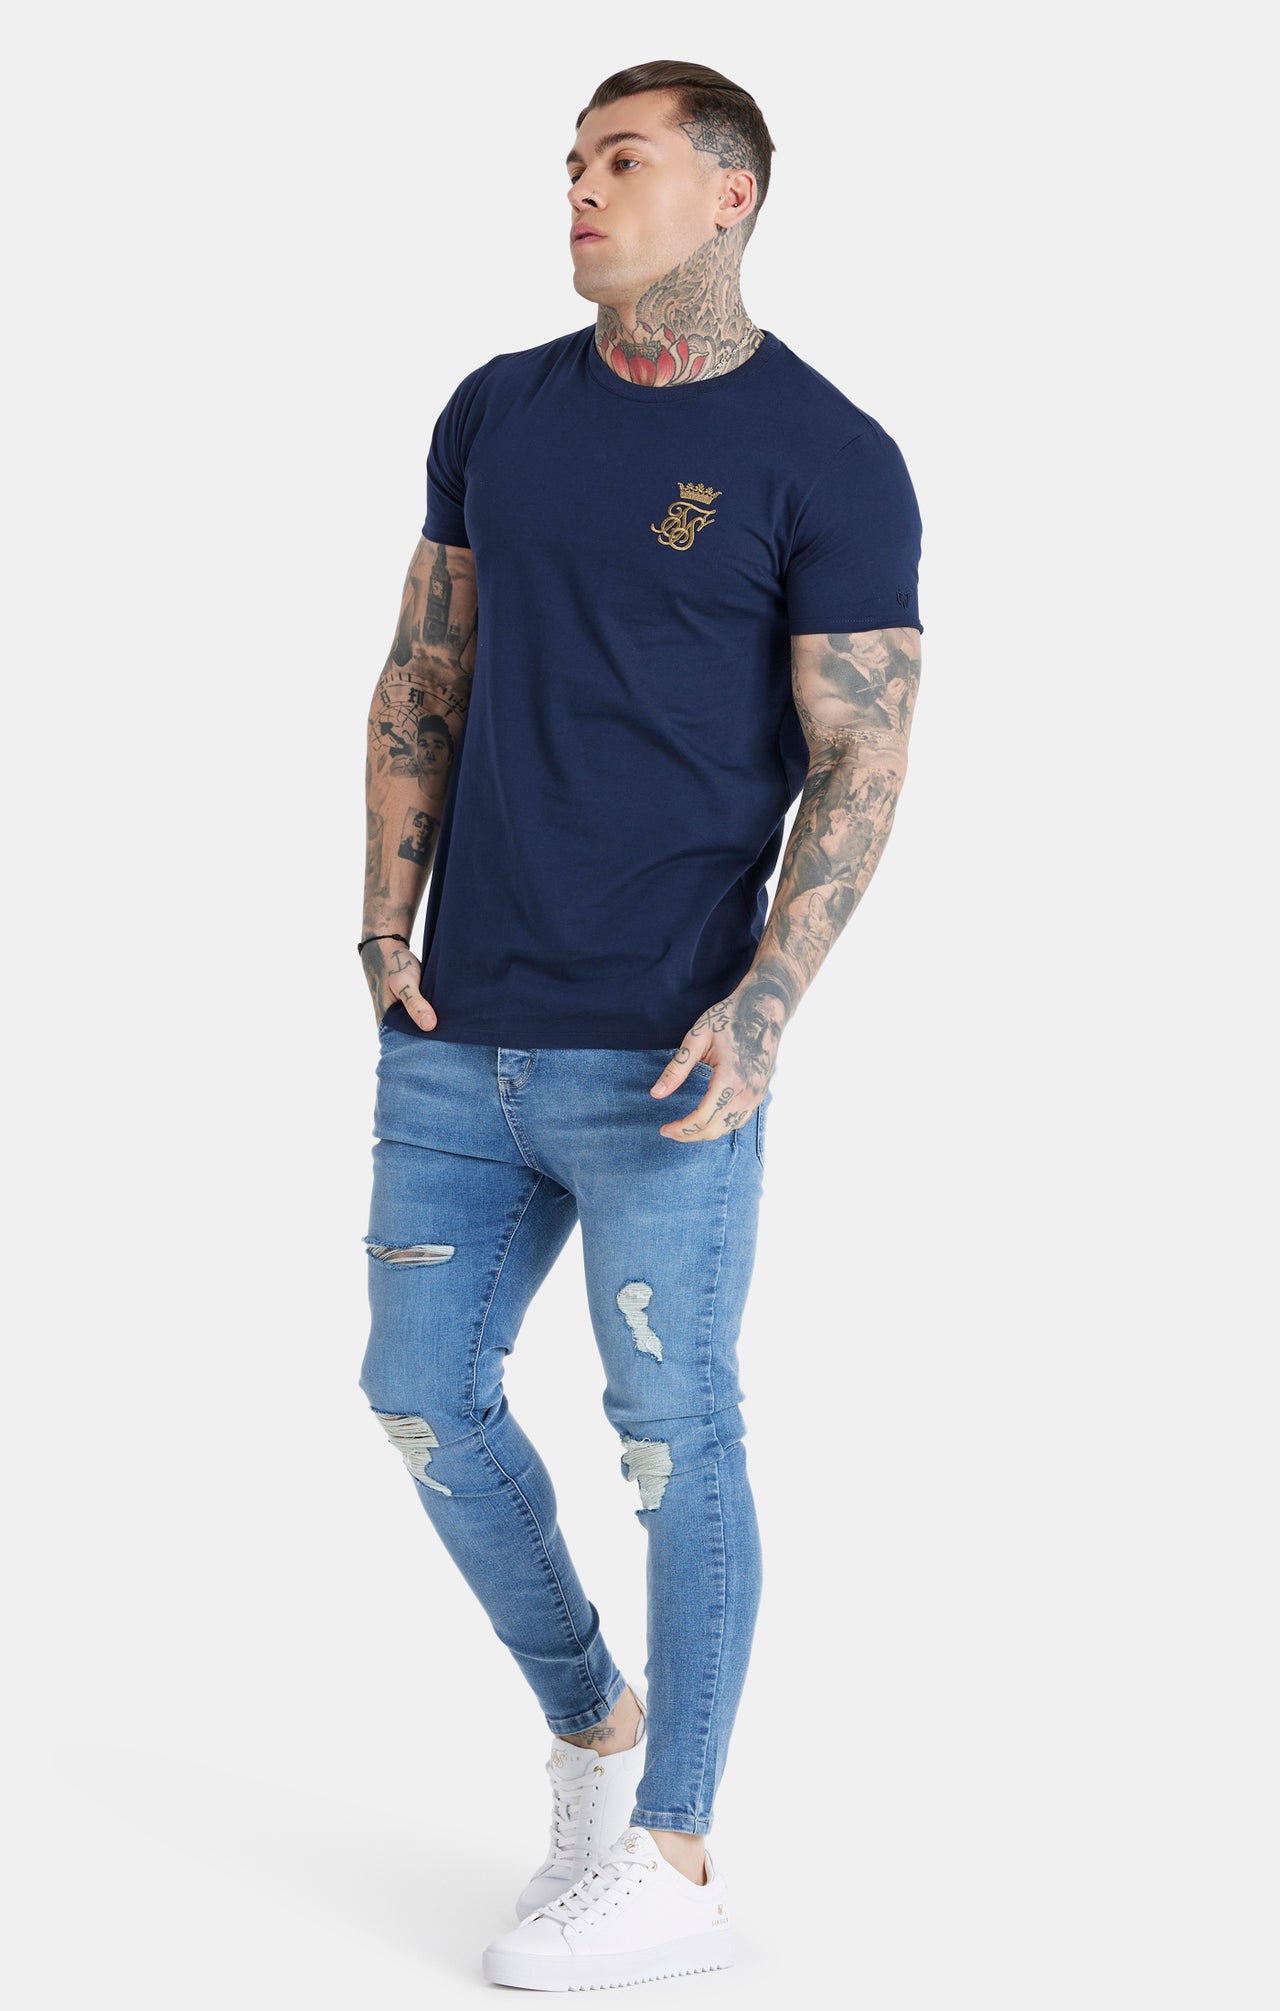 Messi x SikSilk Navy Muscle Fit (3)